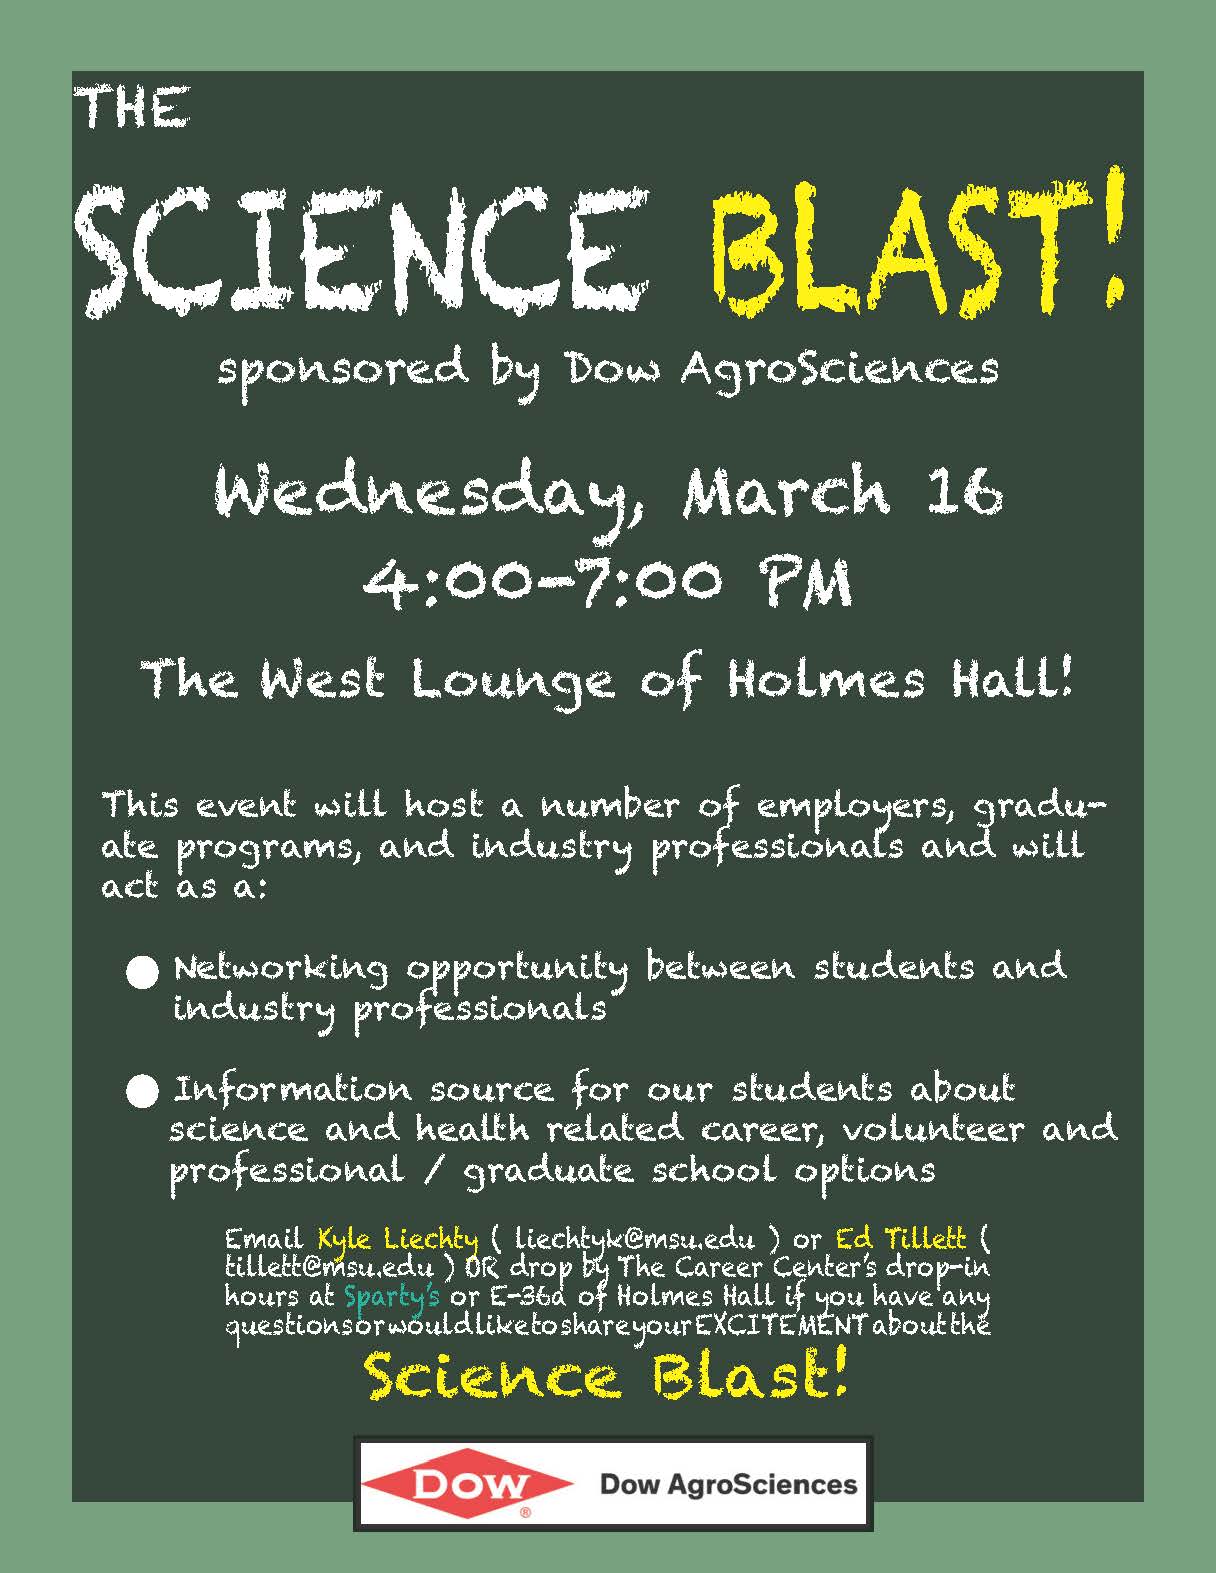 Network with Professionals during Science Blast!